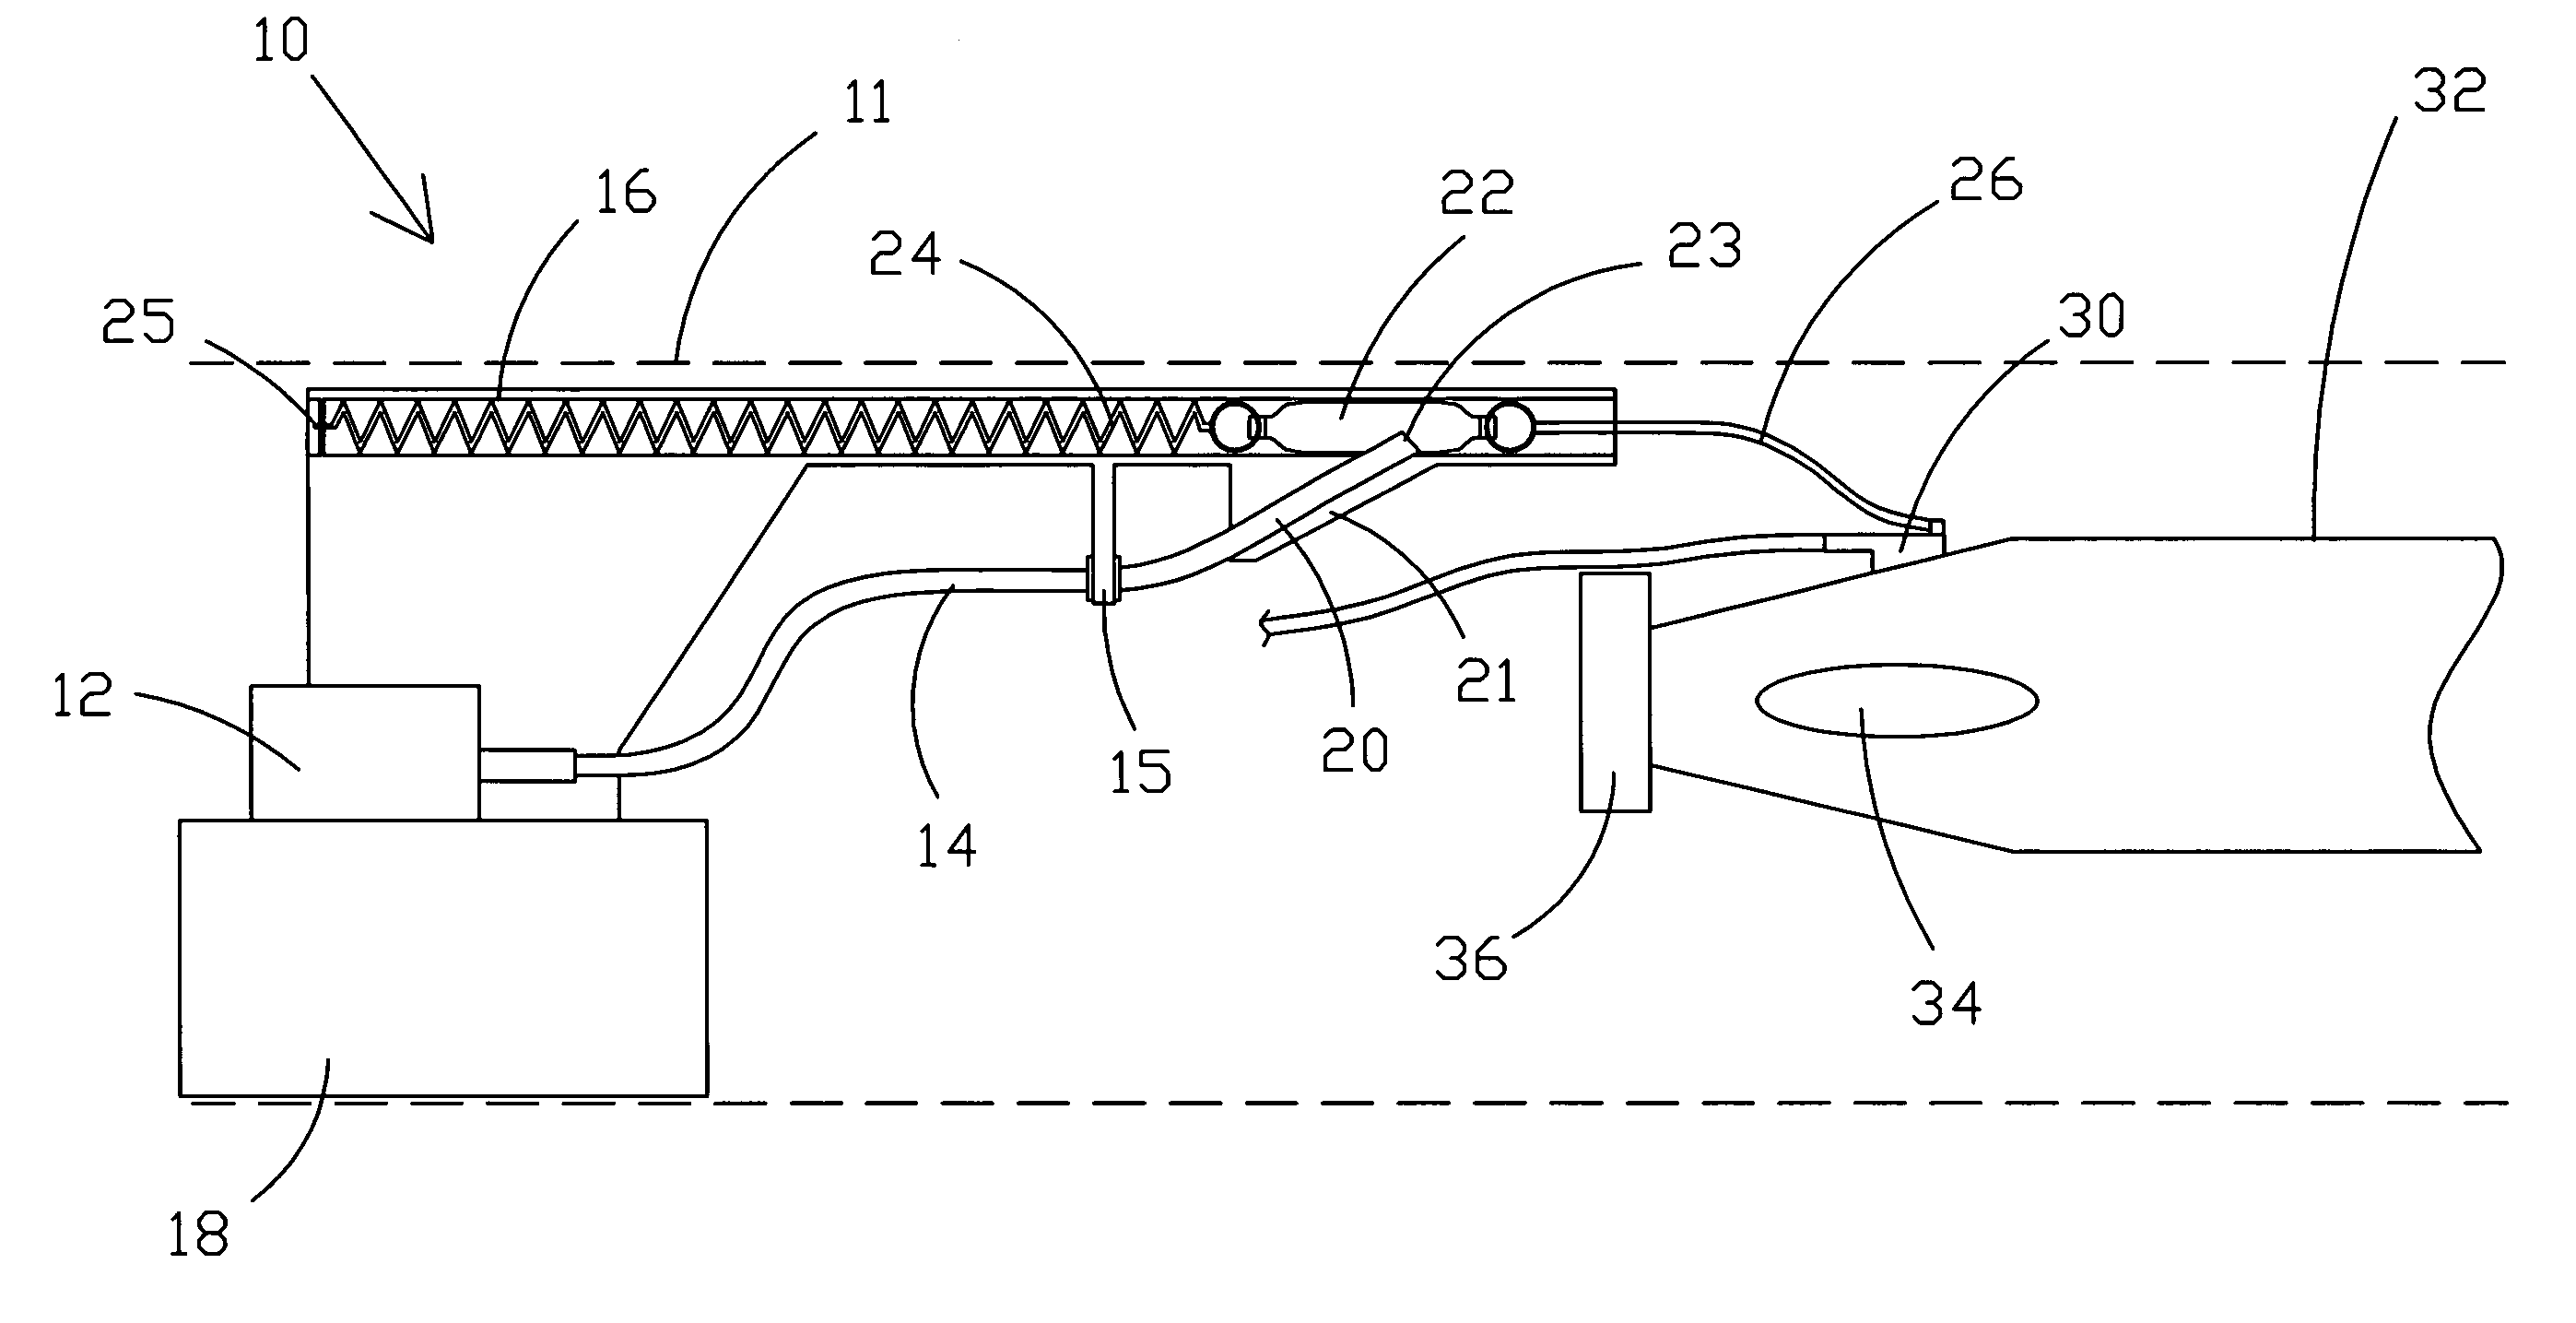 Umbilical retraction assembly and method